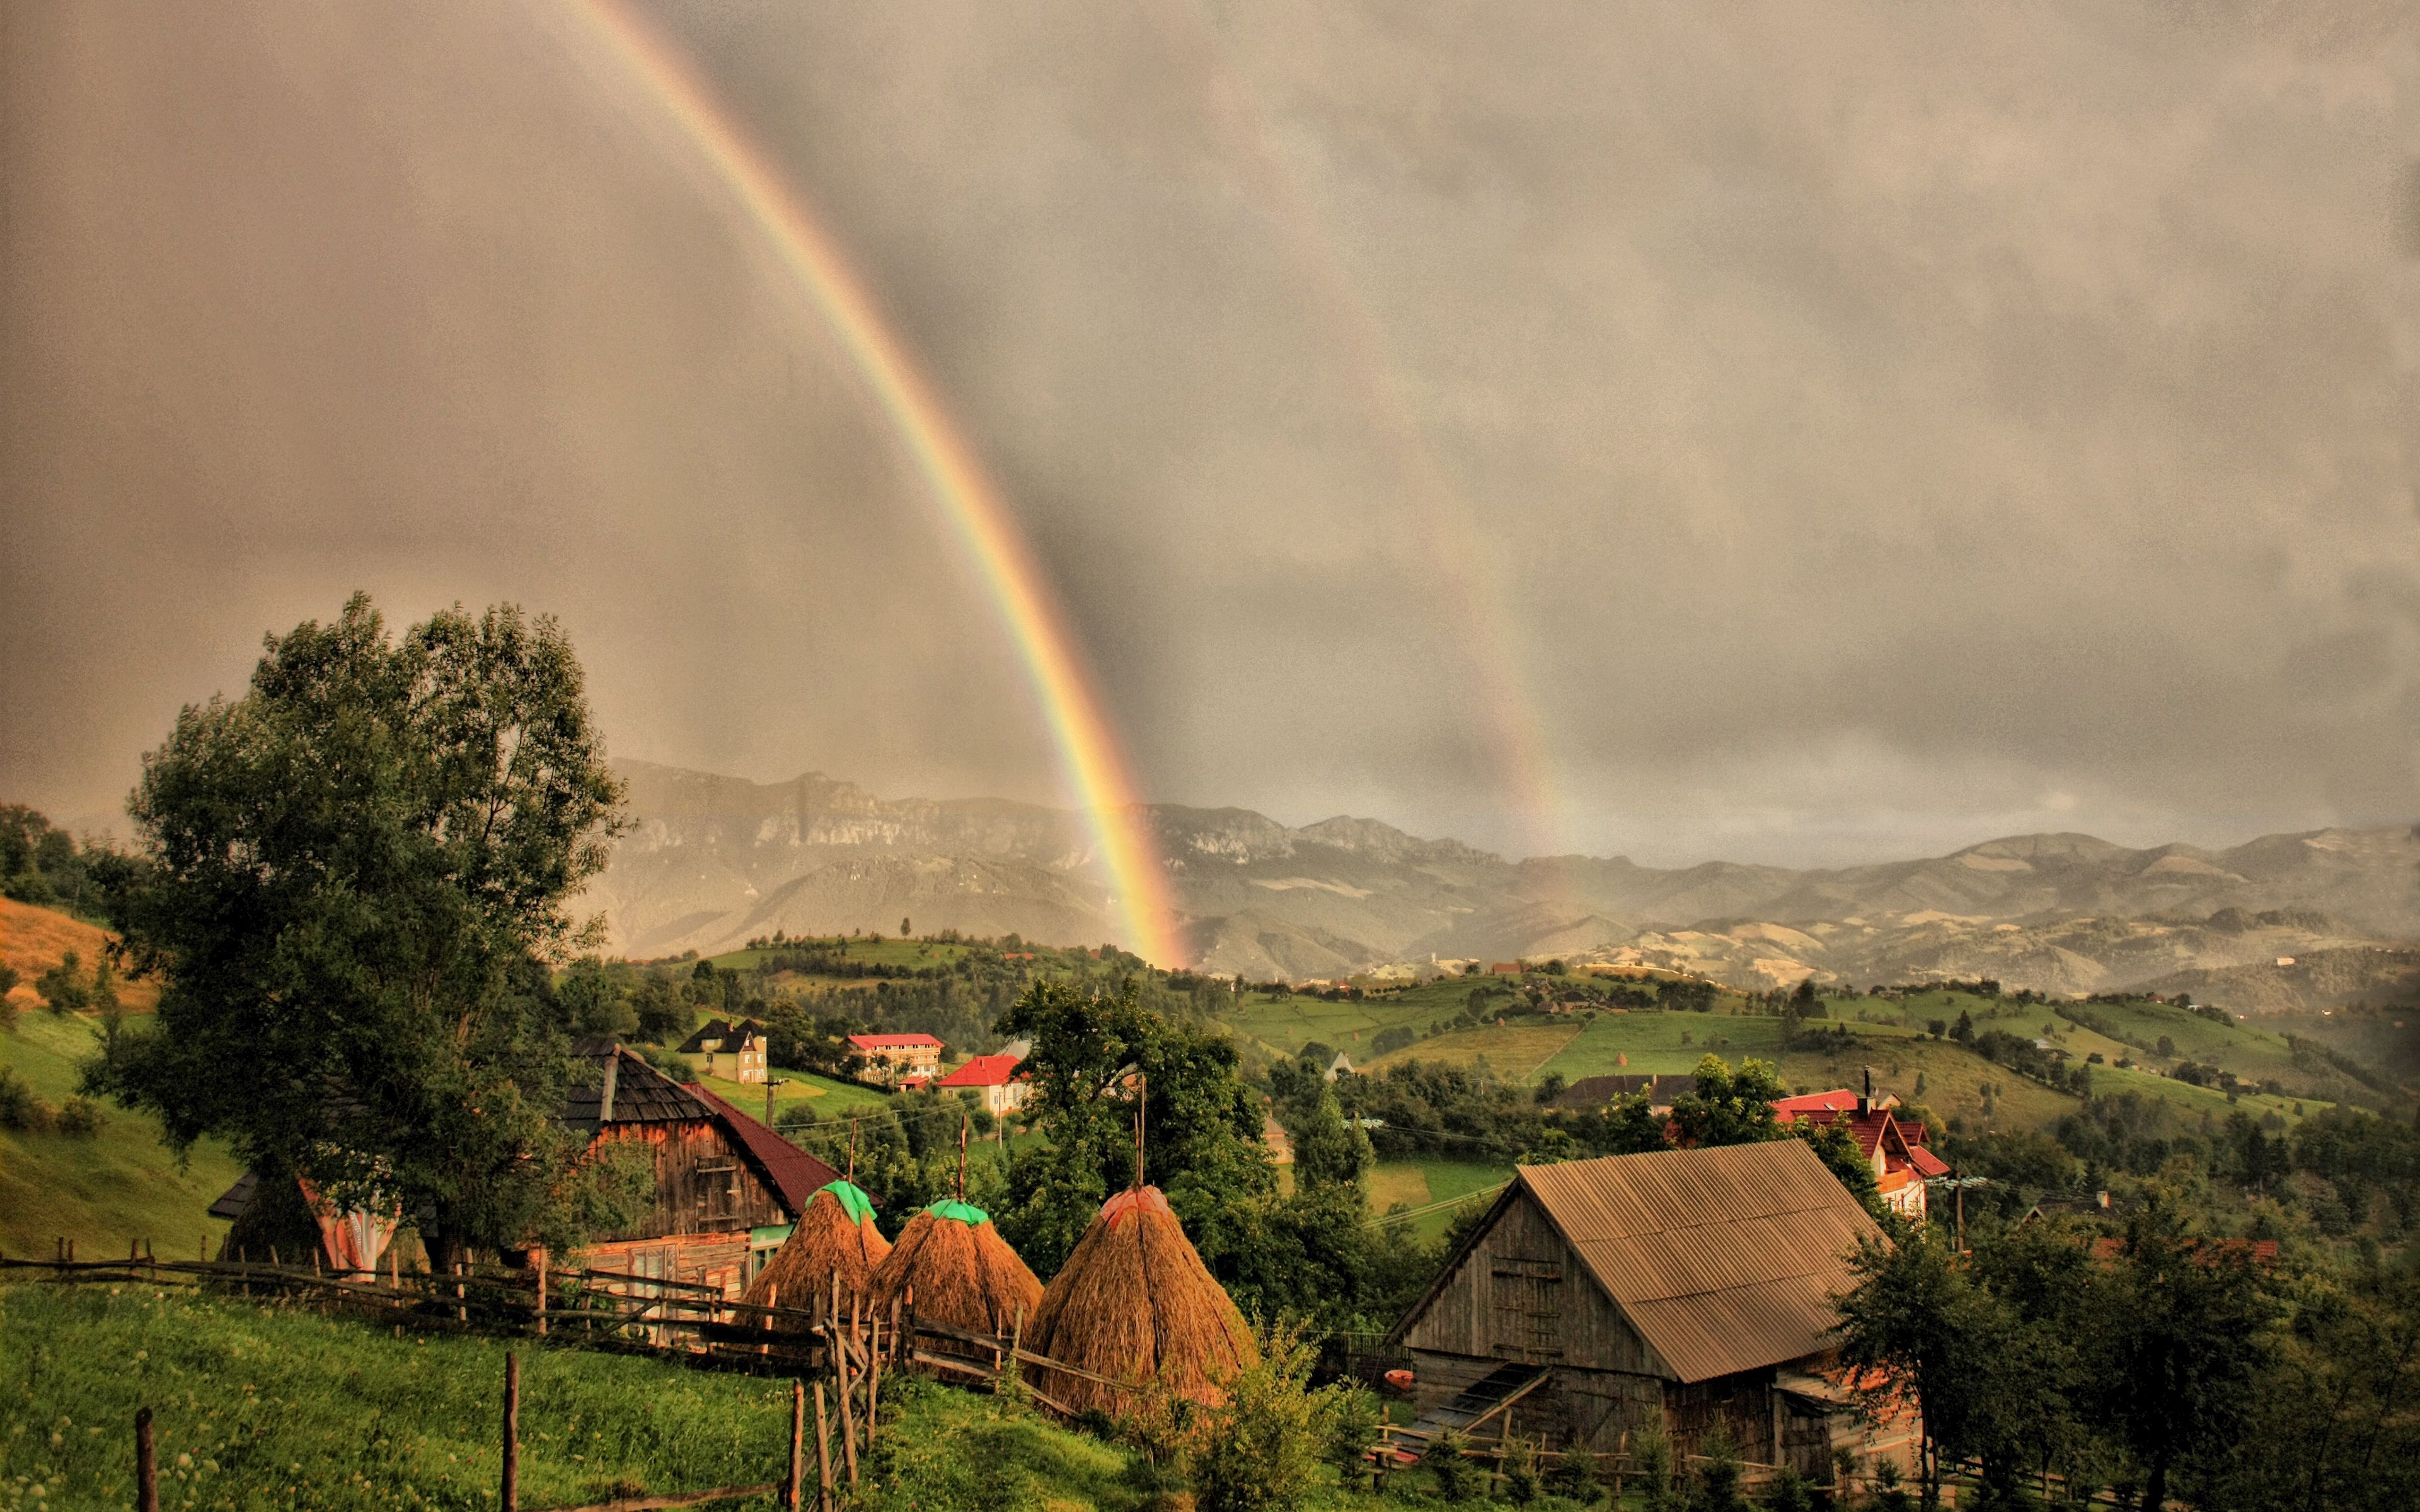 Download wallpaper 3840x2400 houses, clouds, rainbow, landscape 4k ultra HD 16:10 HD background